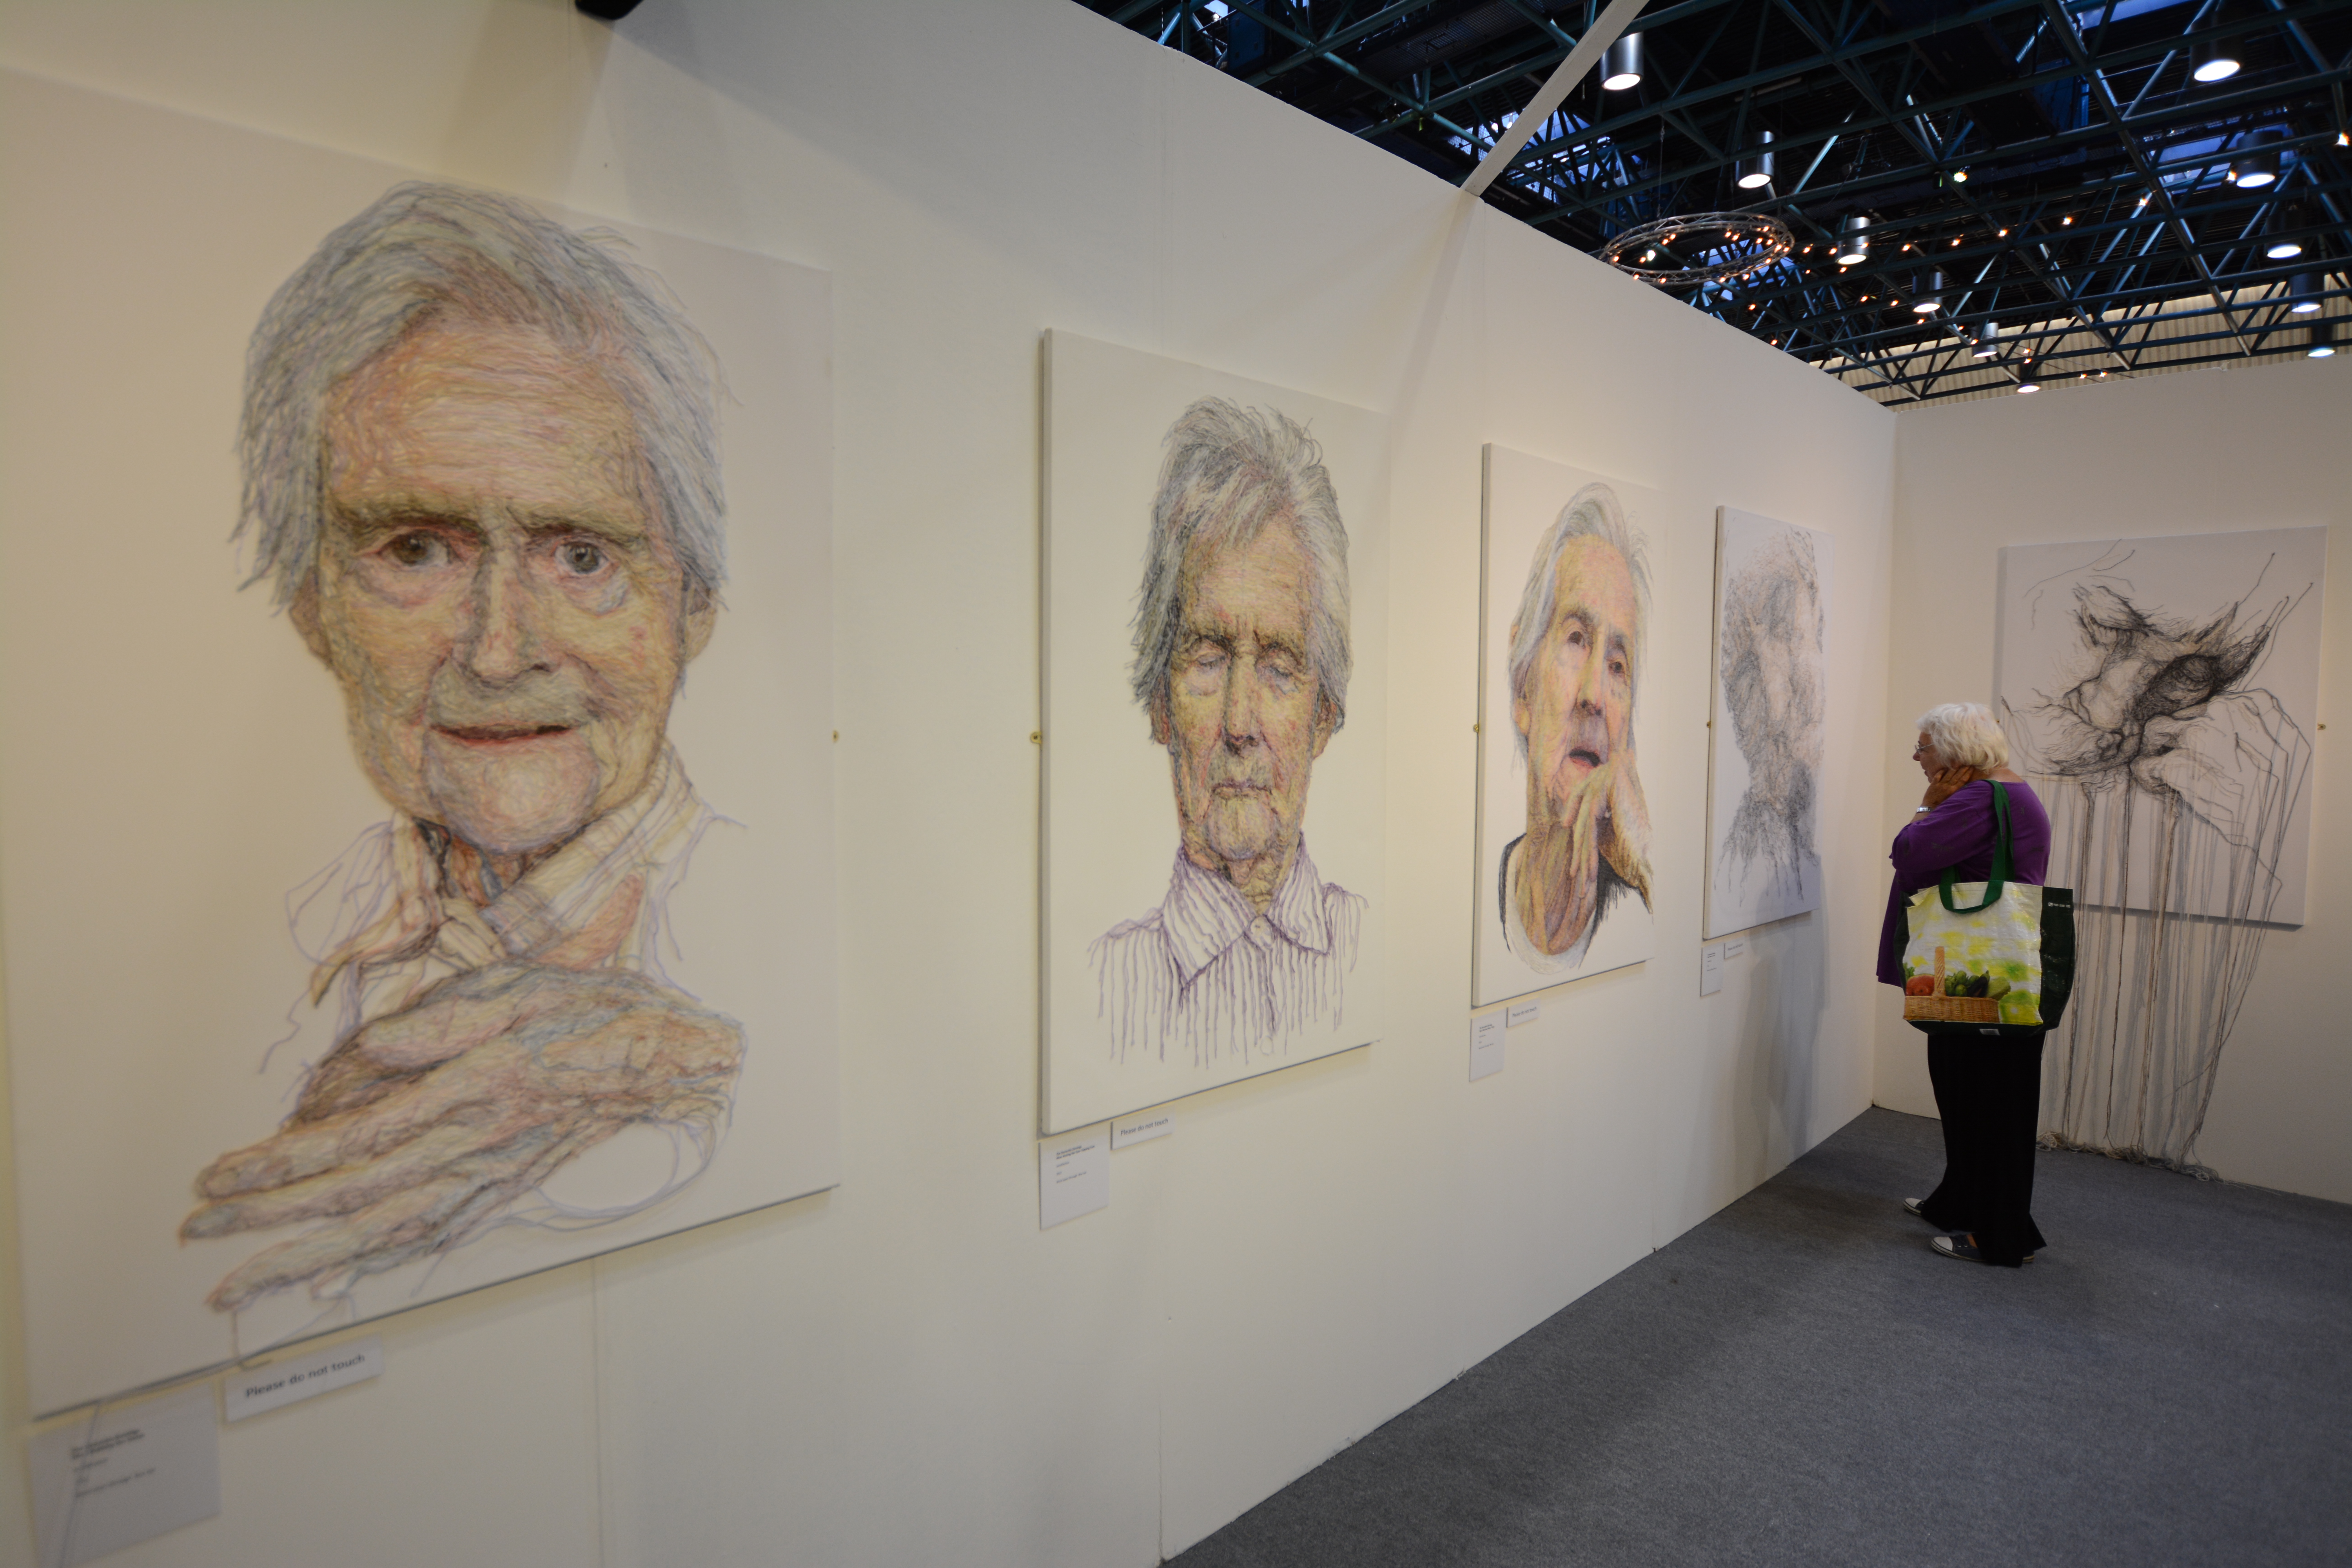 The Dementia Darnings by Jenni Dutton at the London knitting and stitching show